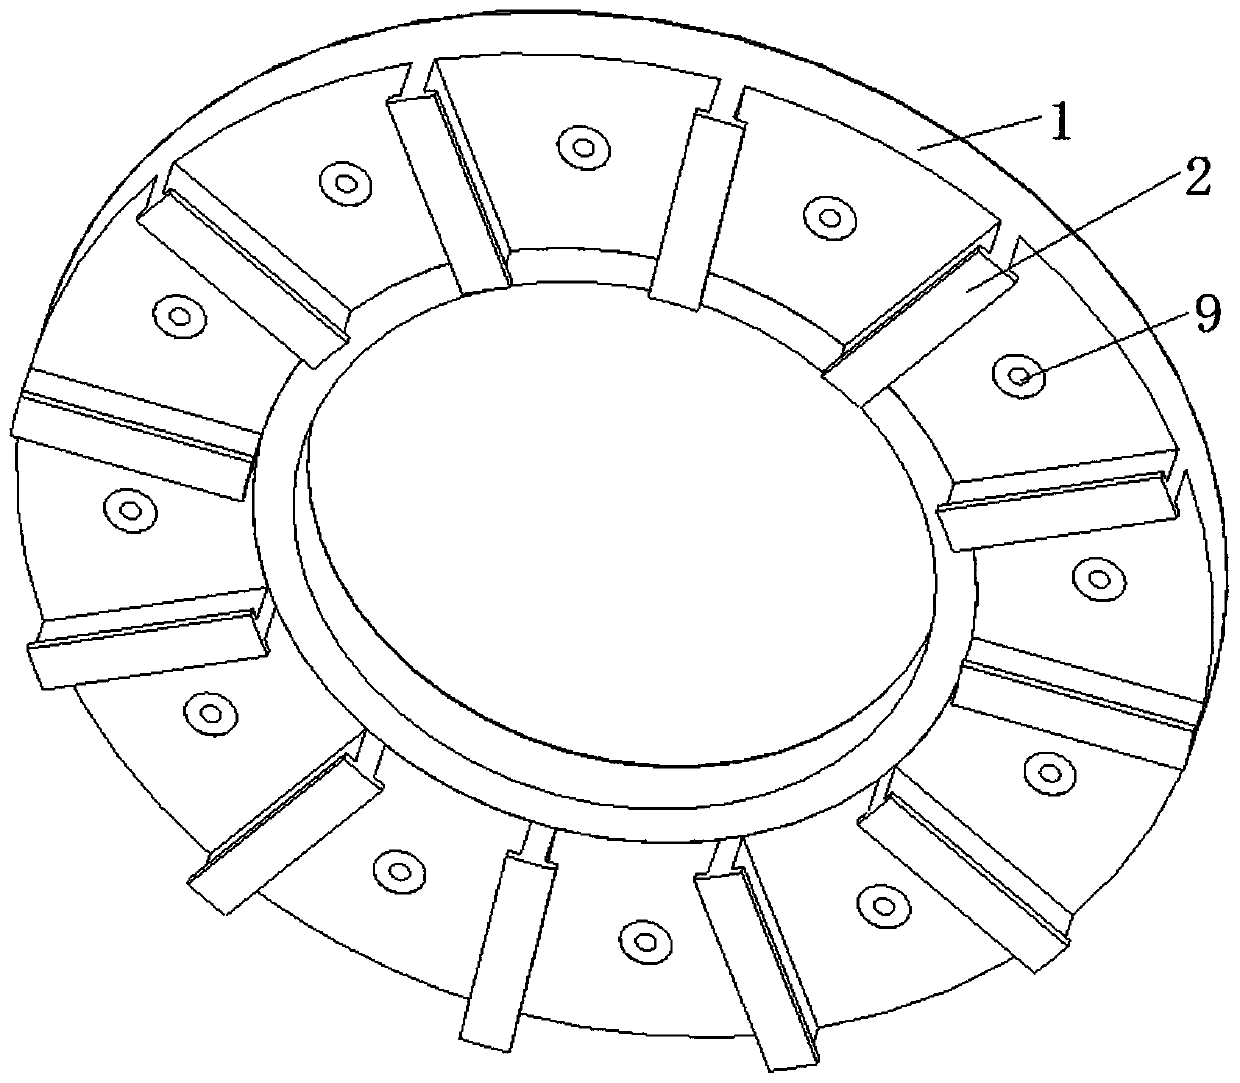 Disc type motor rotor with pole shoe composite magnetic pole structure